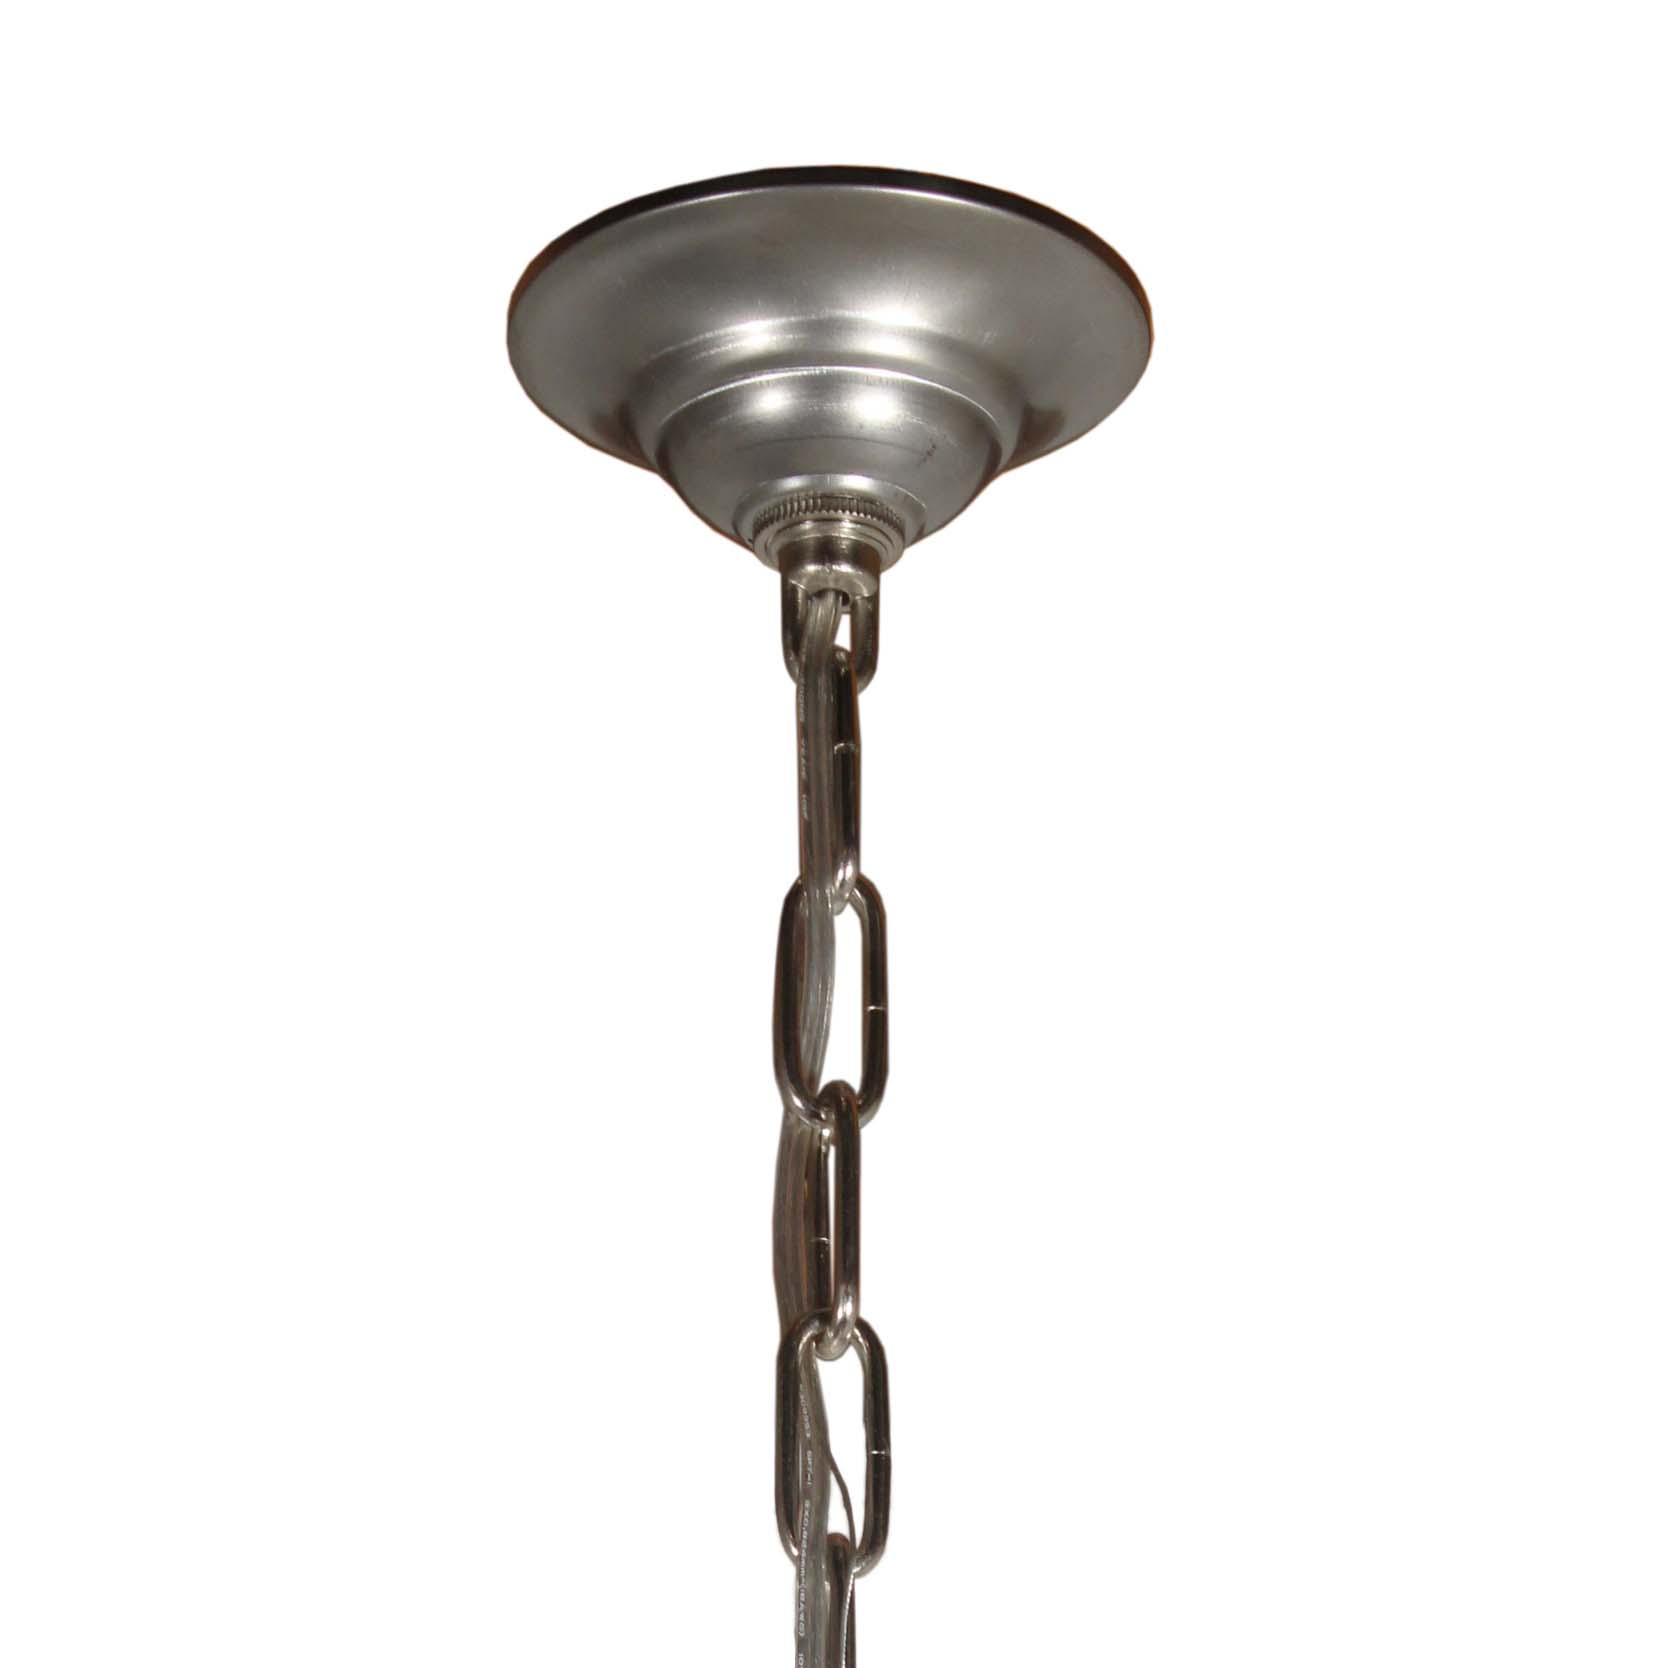 SOLD Antique Neoclassical Pendant Light, Silver Plate-67865